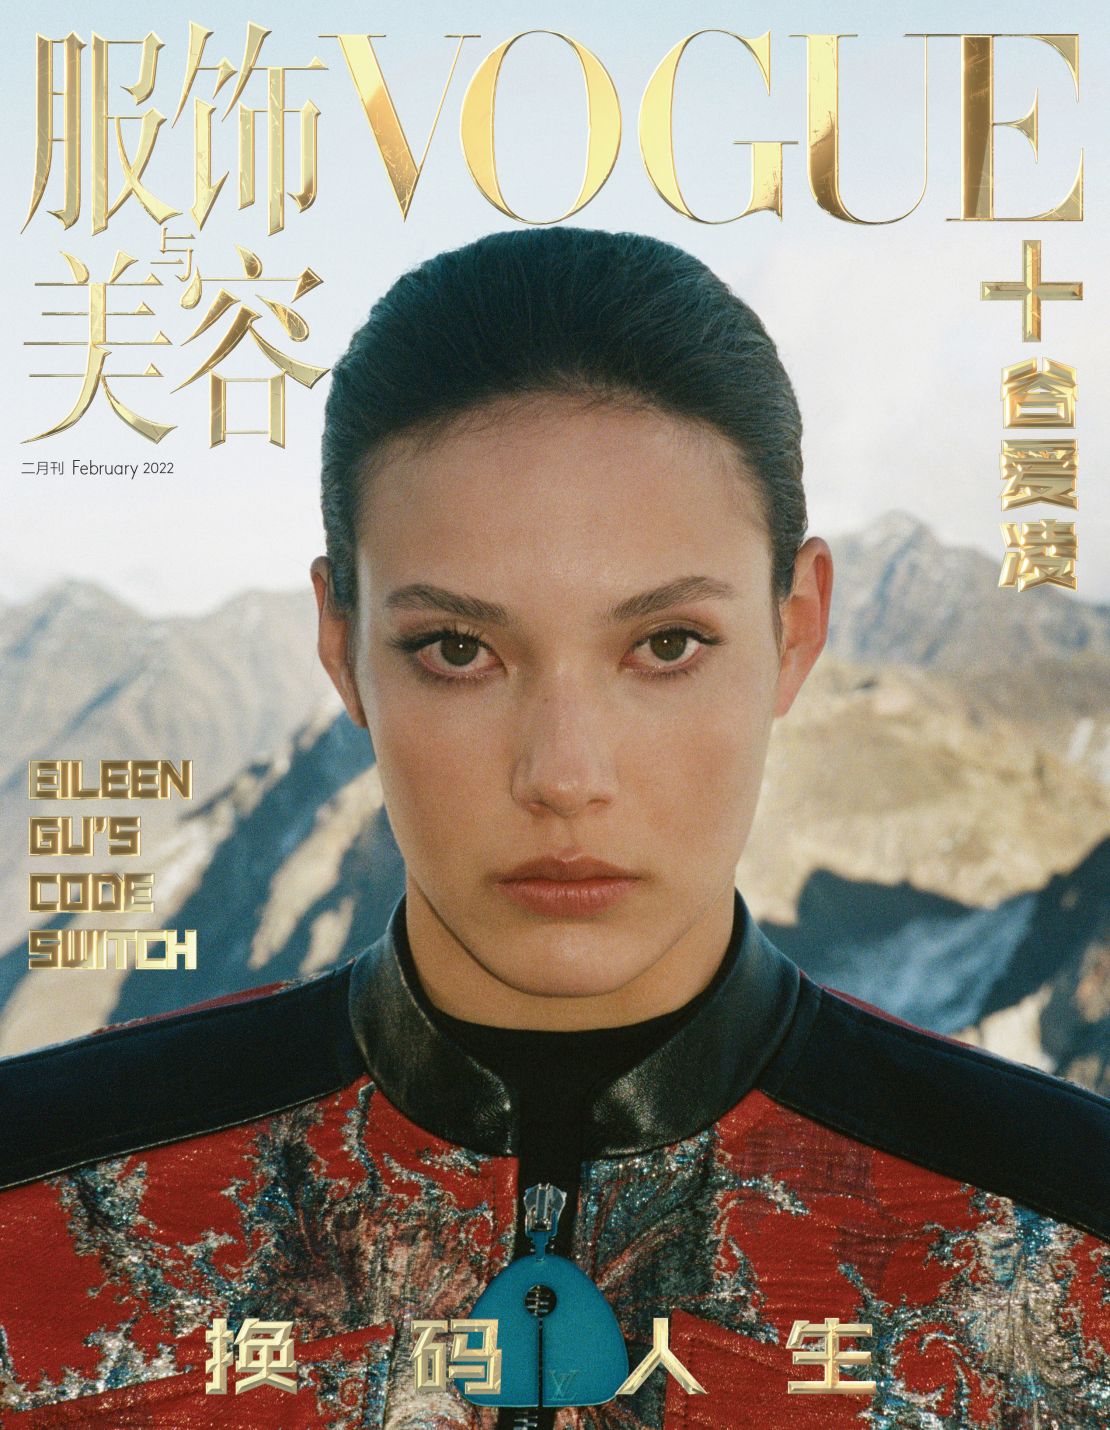 The skiing star guest-edited an issue of Vogue China's Gen-Z-focused bimonthly issue, Vogue+.